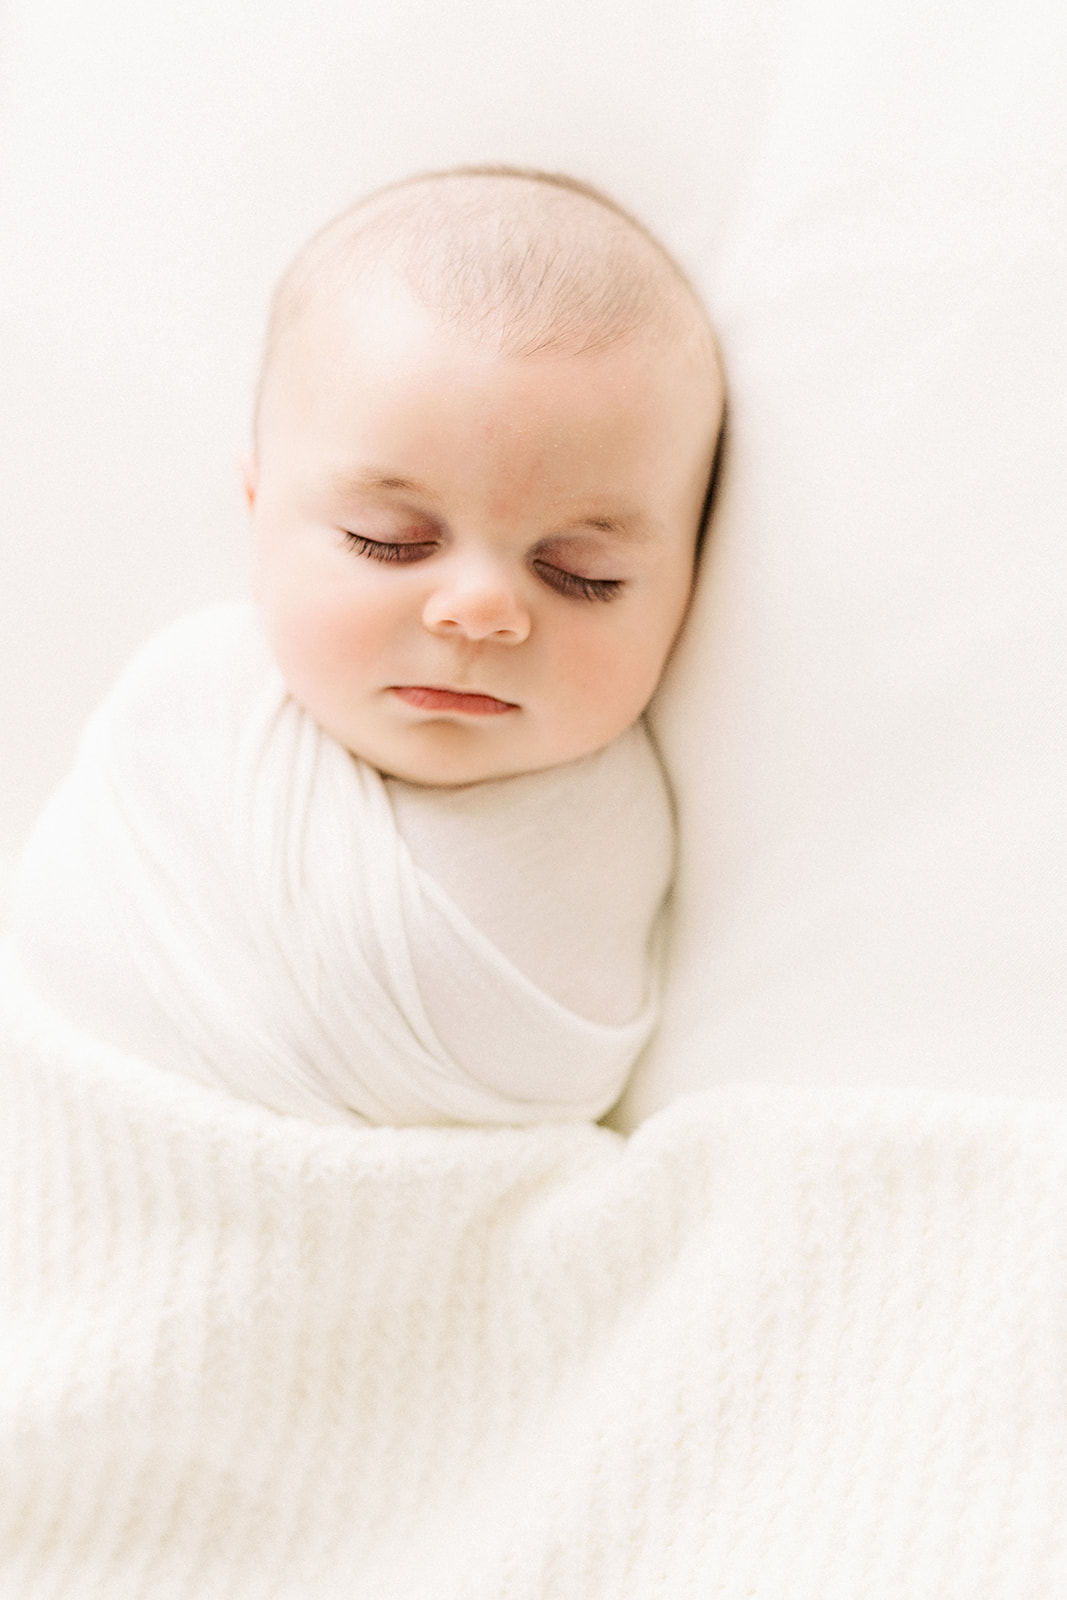 A newborn baby sleeps in a white swaddle in a studio thanks to baby sleep consultant pittsburgh